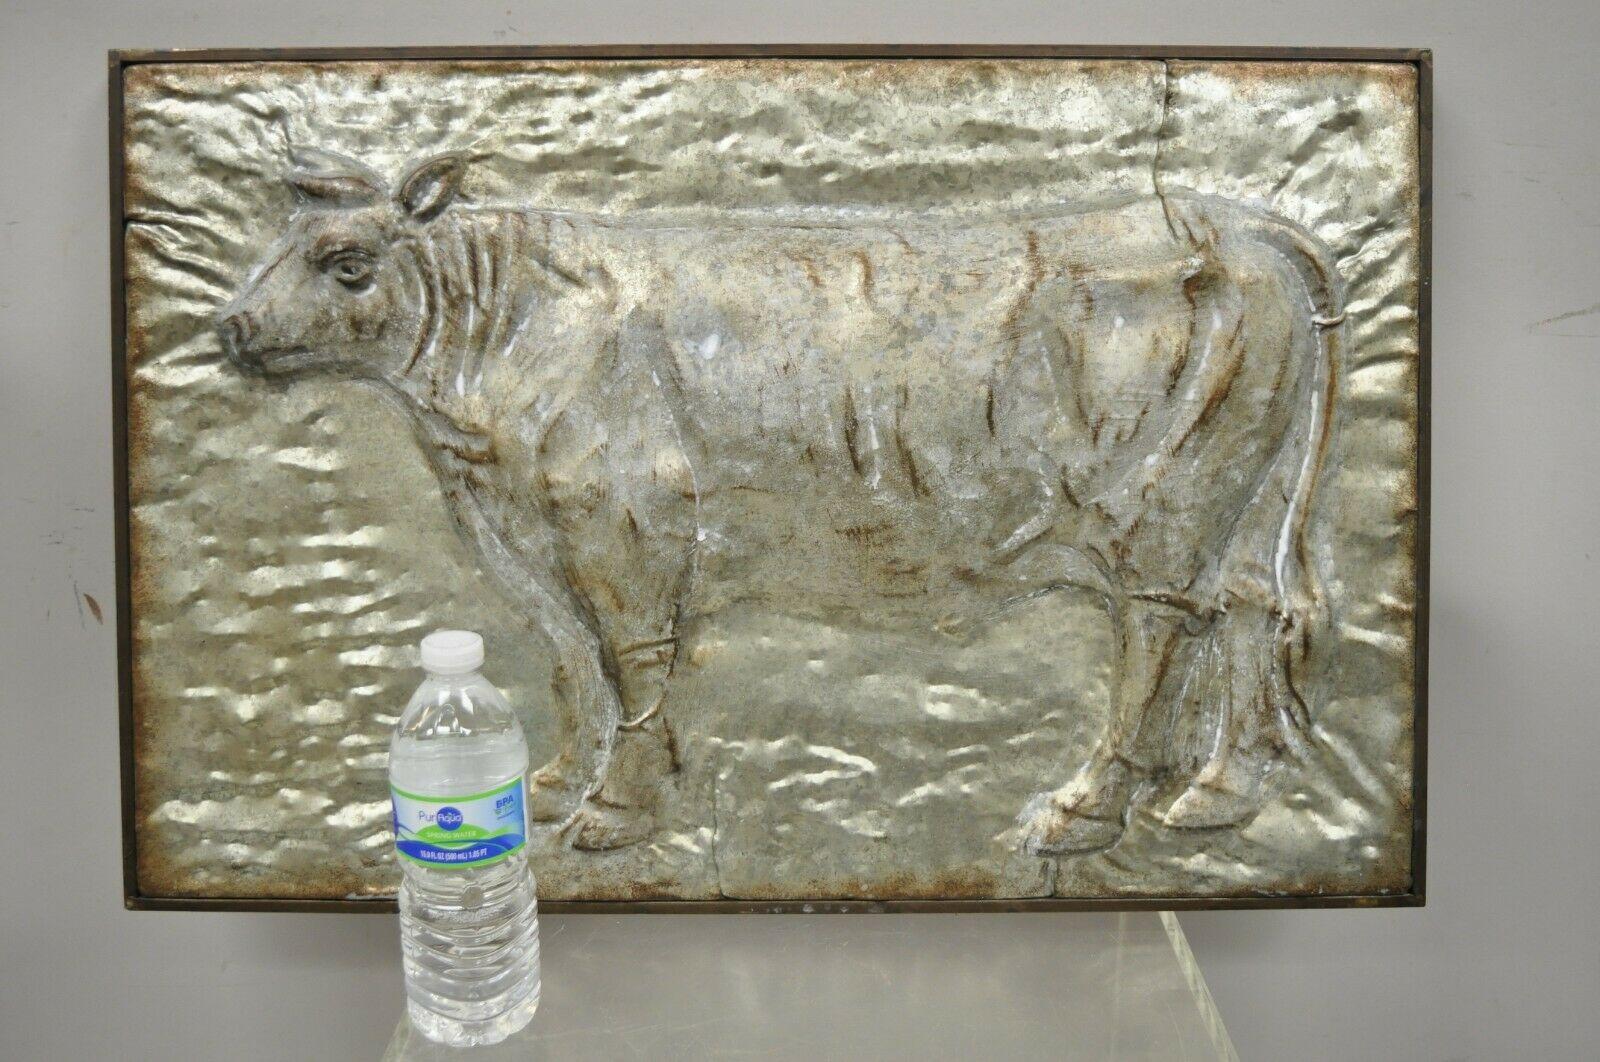 Metal Embossed Cow Wall Art Primitive Tin kitchen decor frame. Item featuers a metal frame and art ,distressed finish, very nice item, great style and form. Circa Late 20th - Early 21st Century. Measurements: 18.5